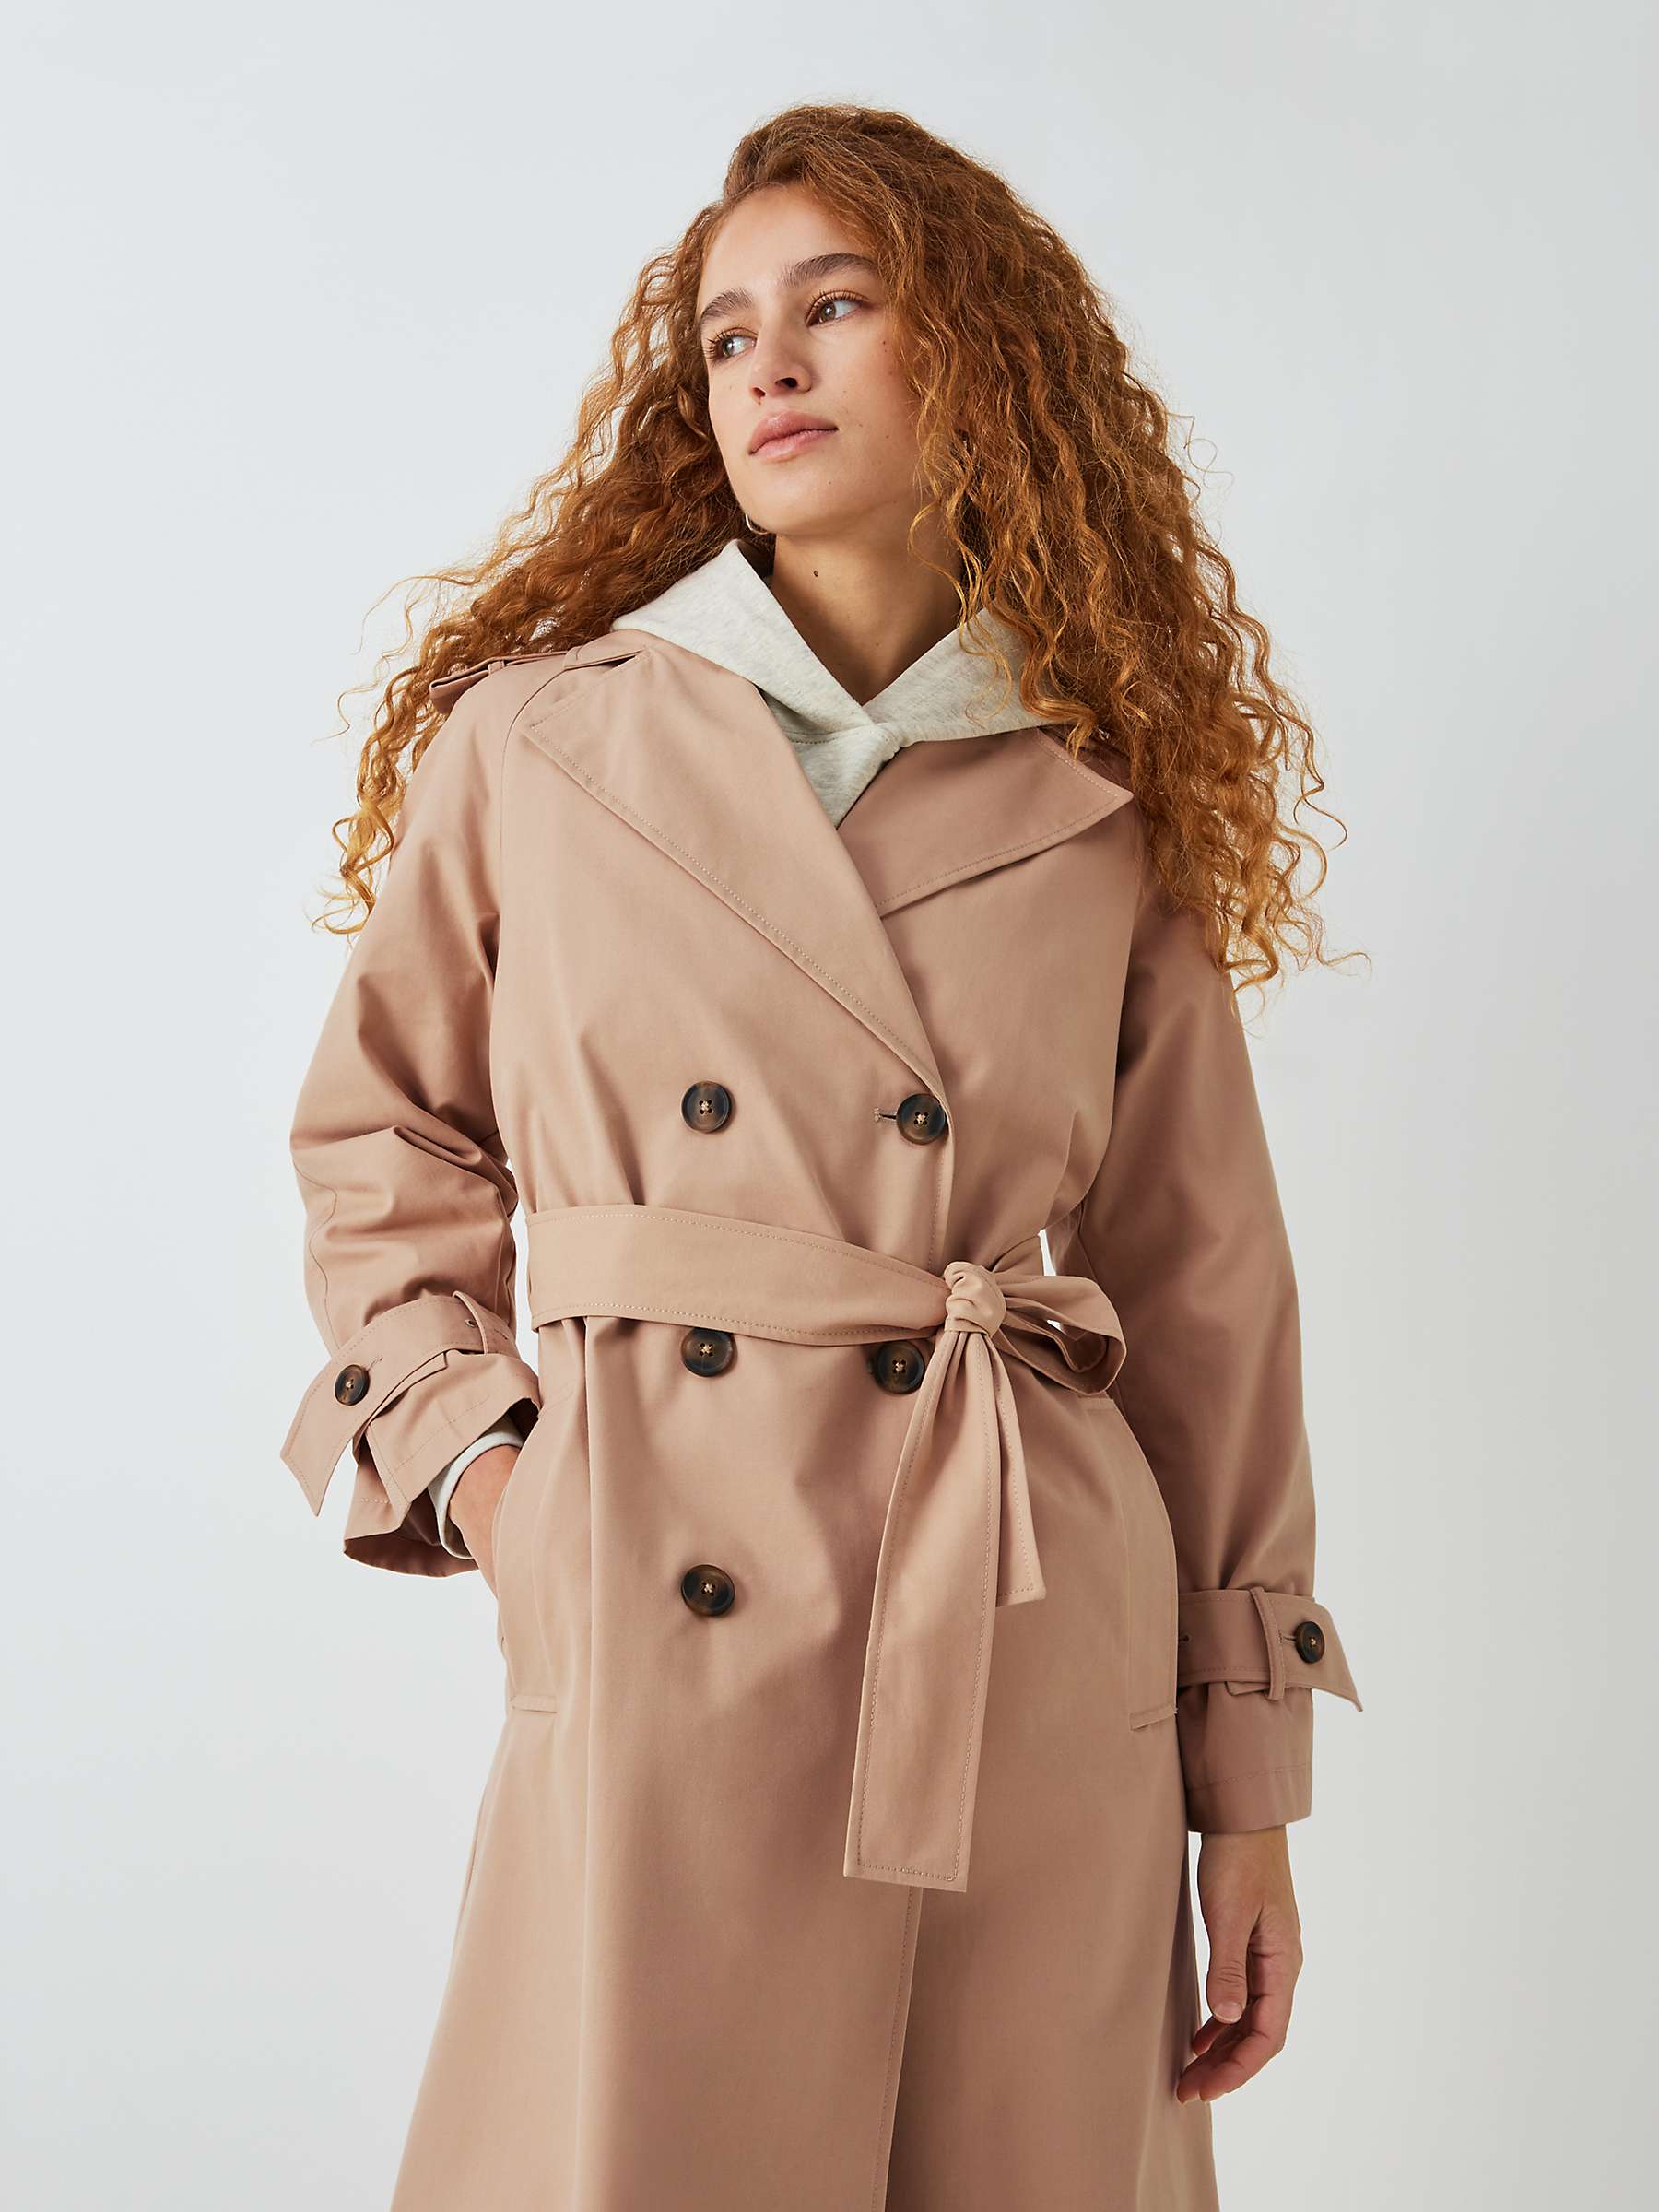 Buy John Lewis ANYDAY Longline Trench Coat Online at johnlewis.com